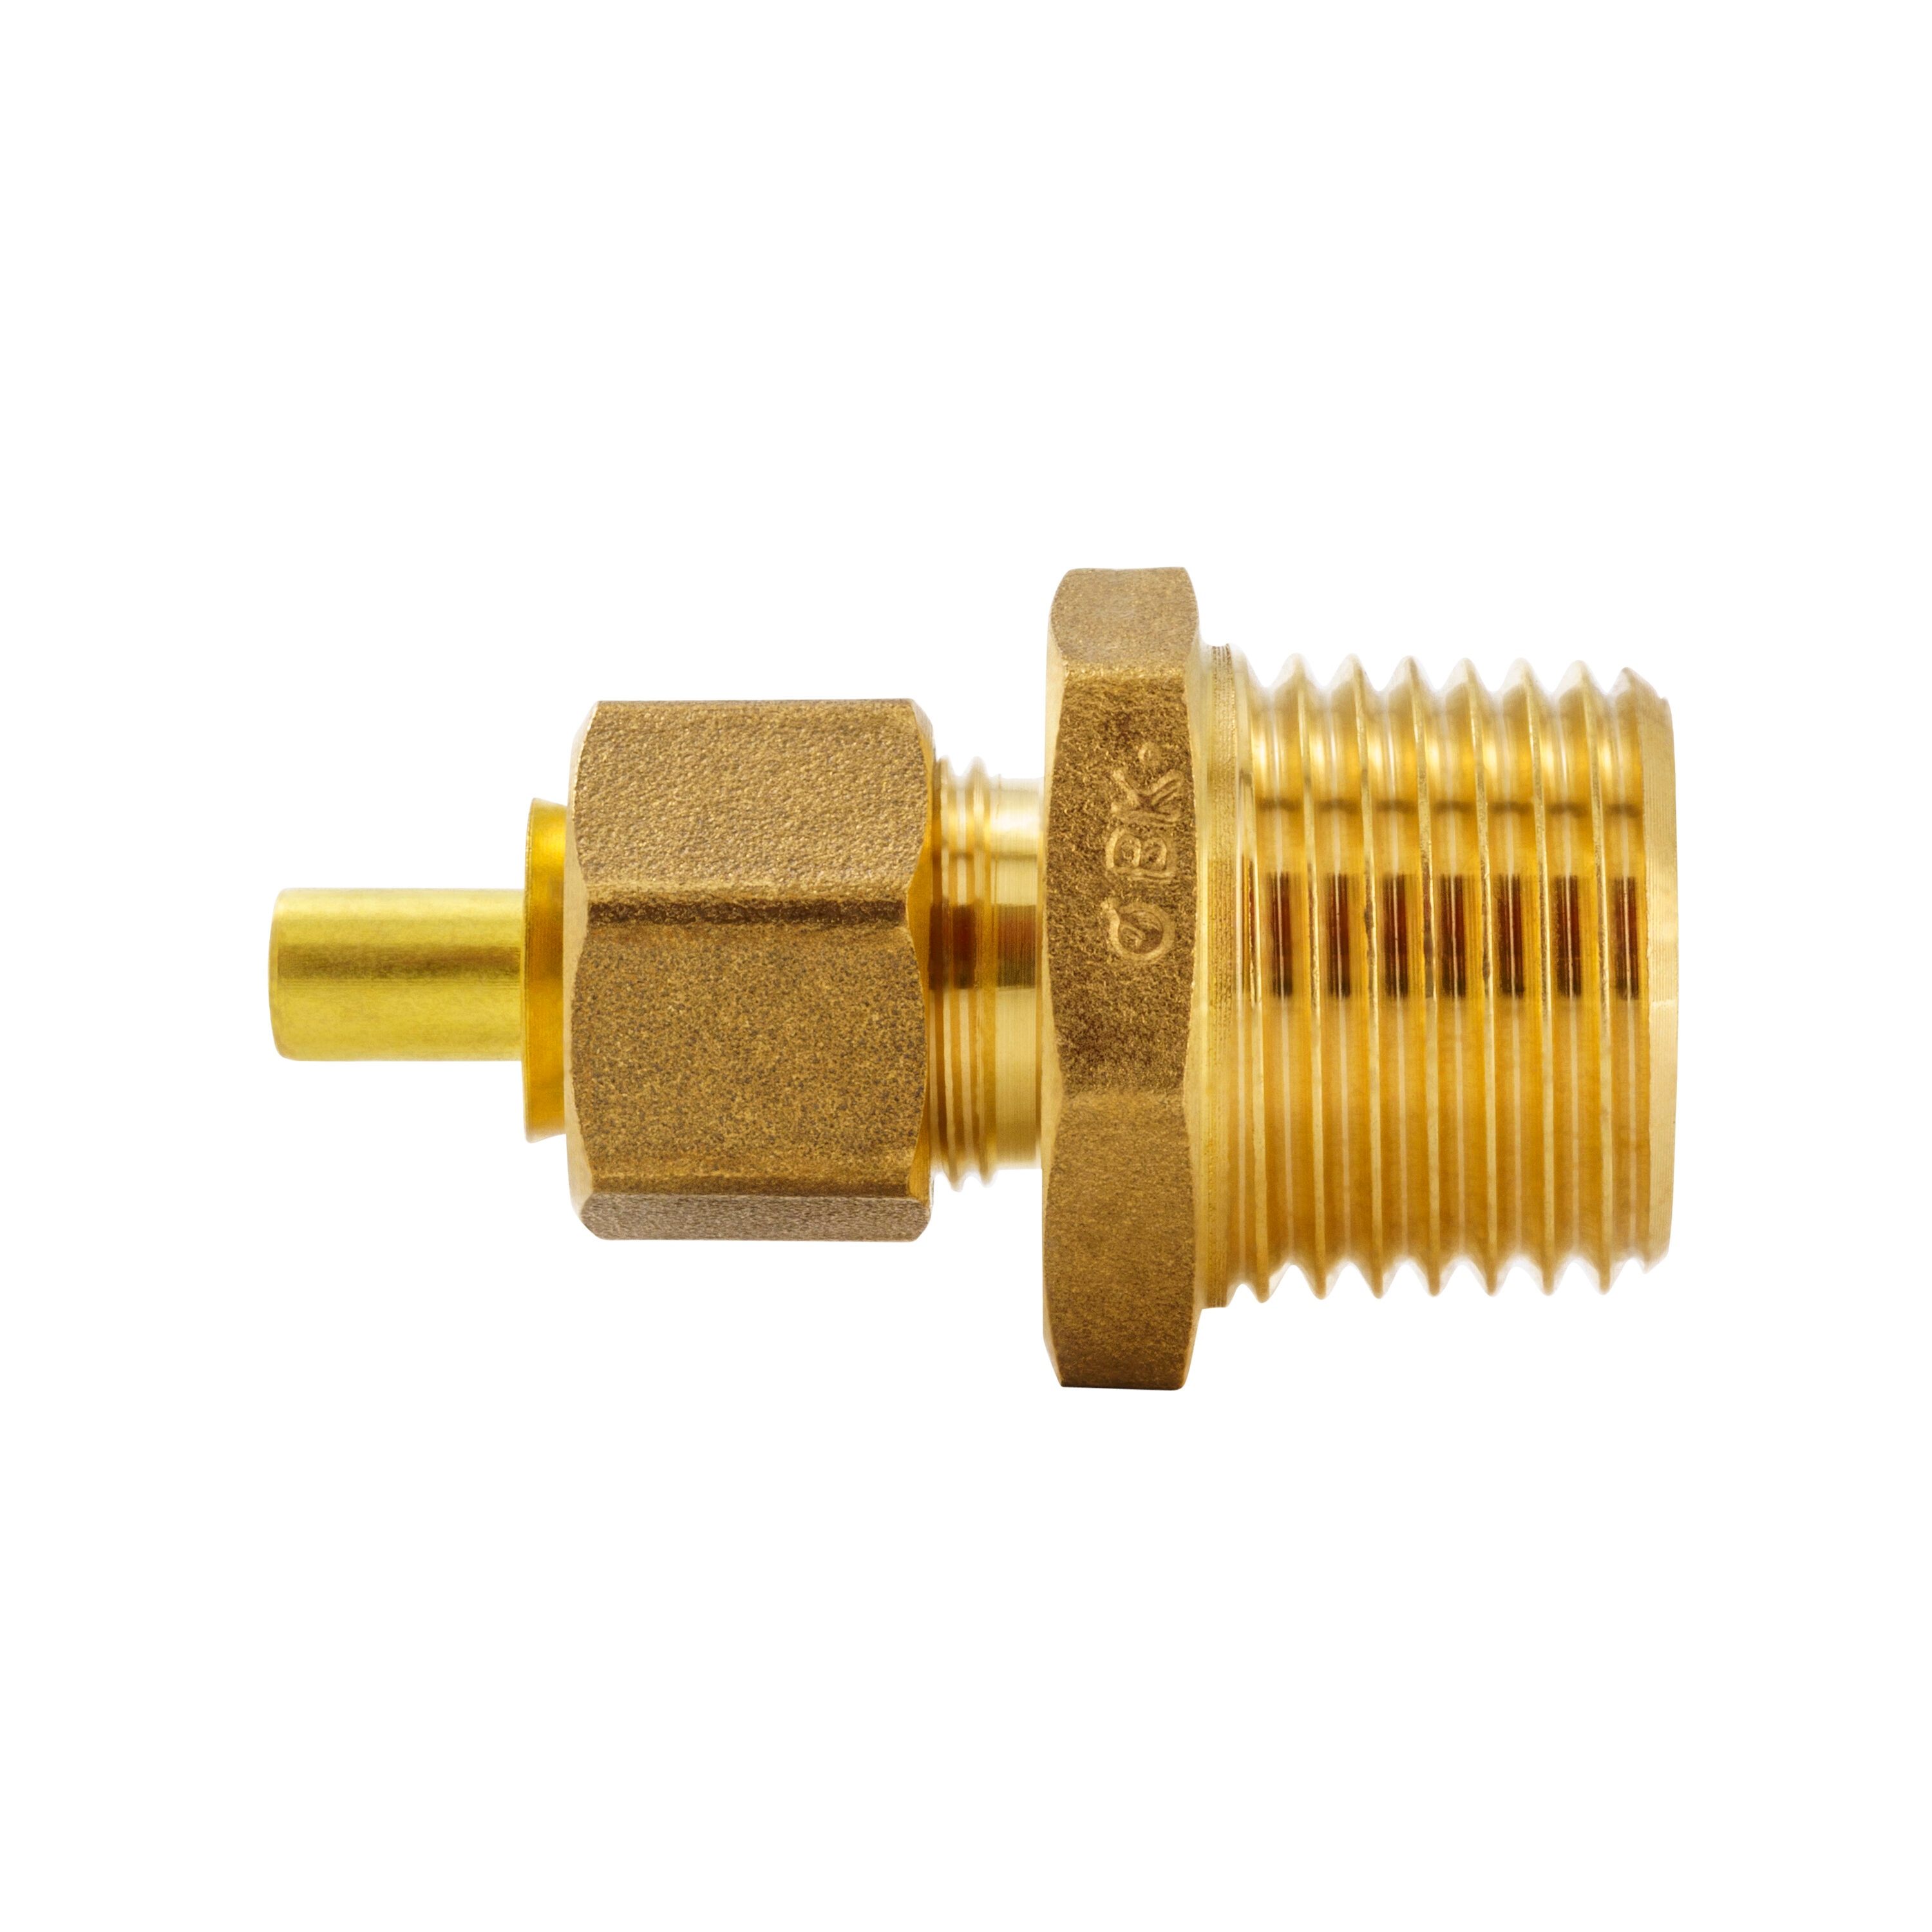 Brass No-Crush Insert for 3/8 Nylon Tubing Compression Fittings